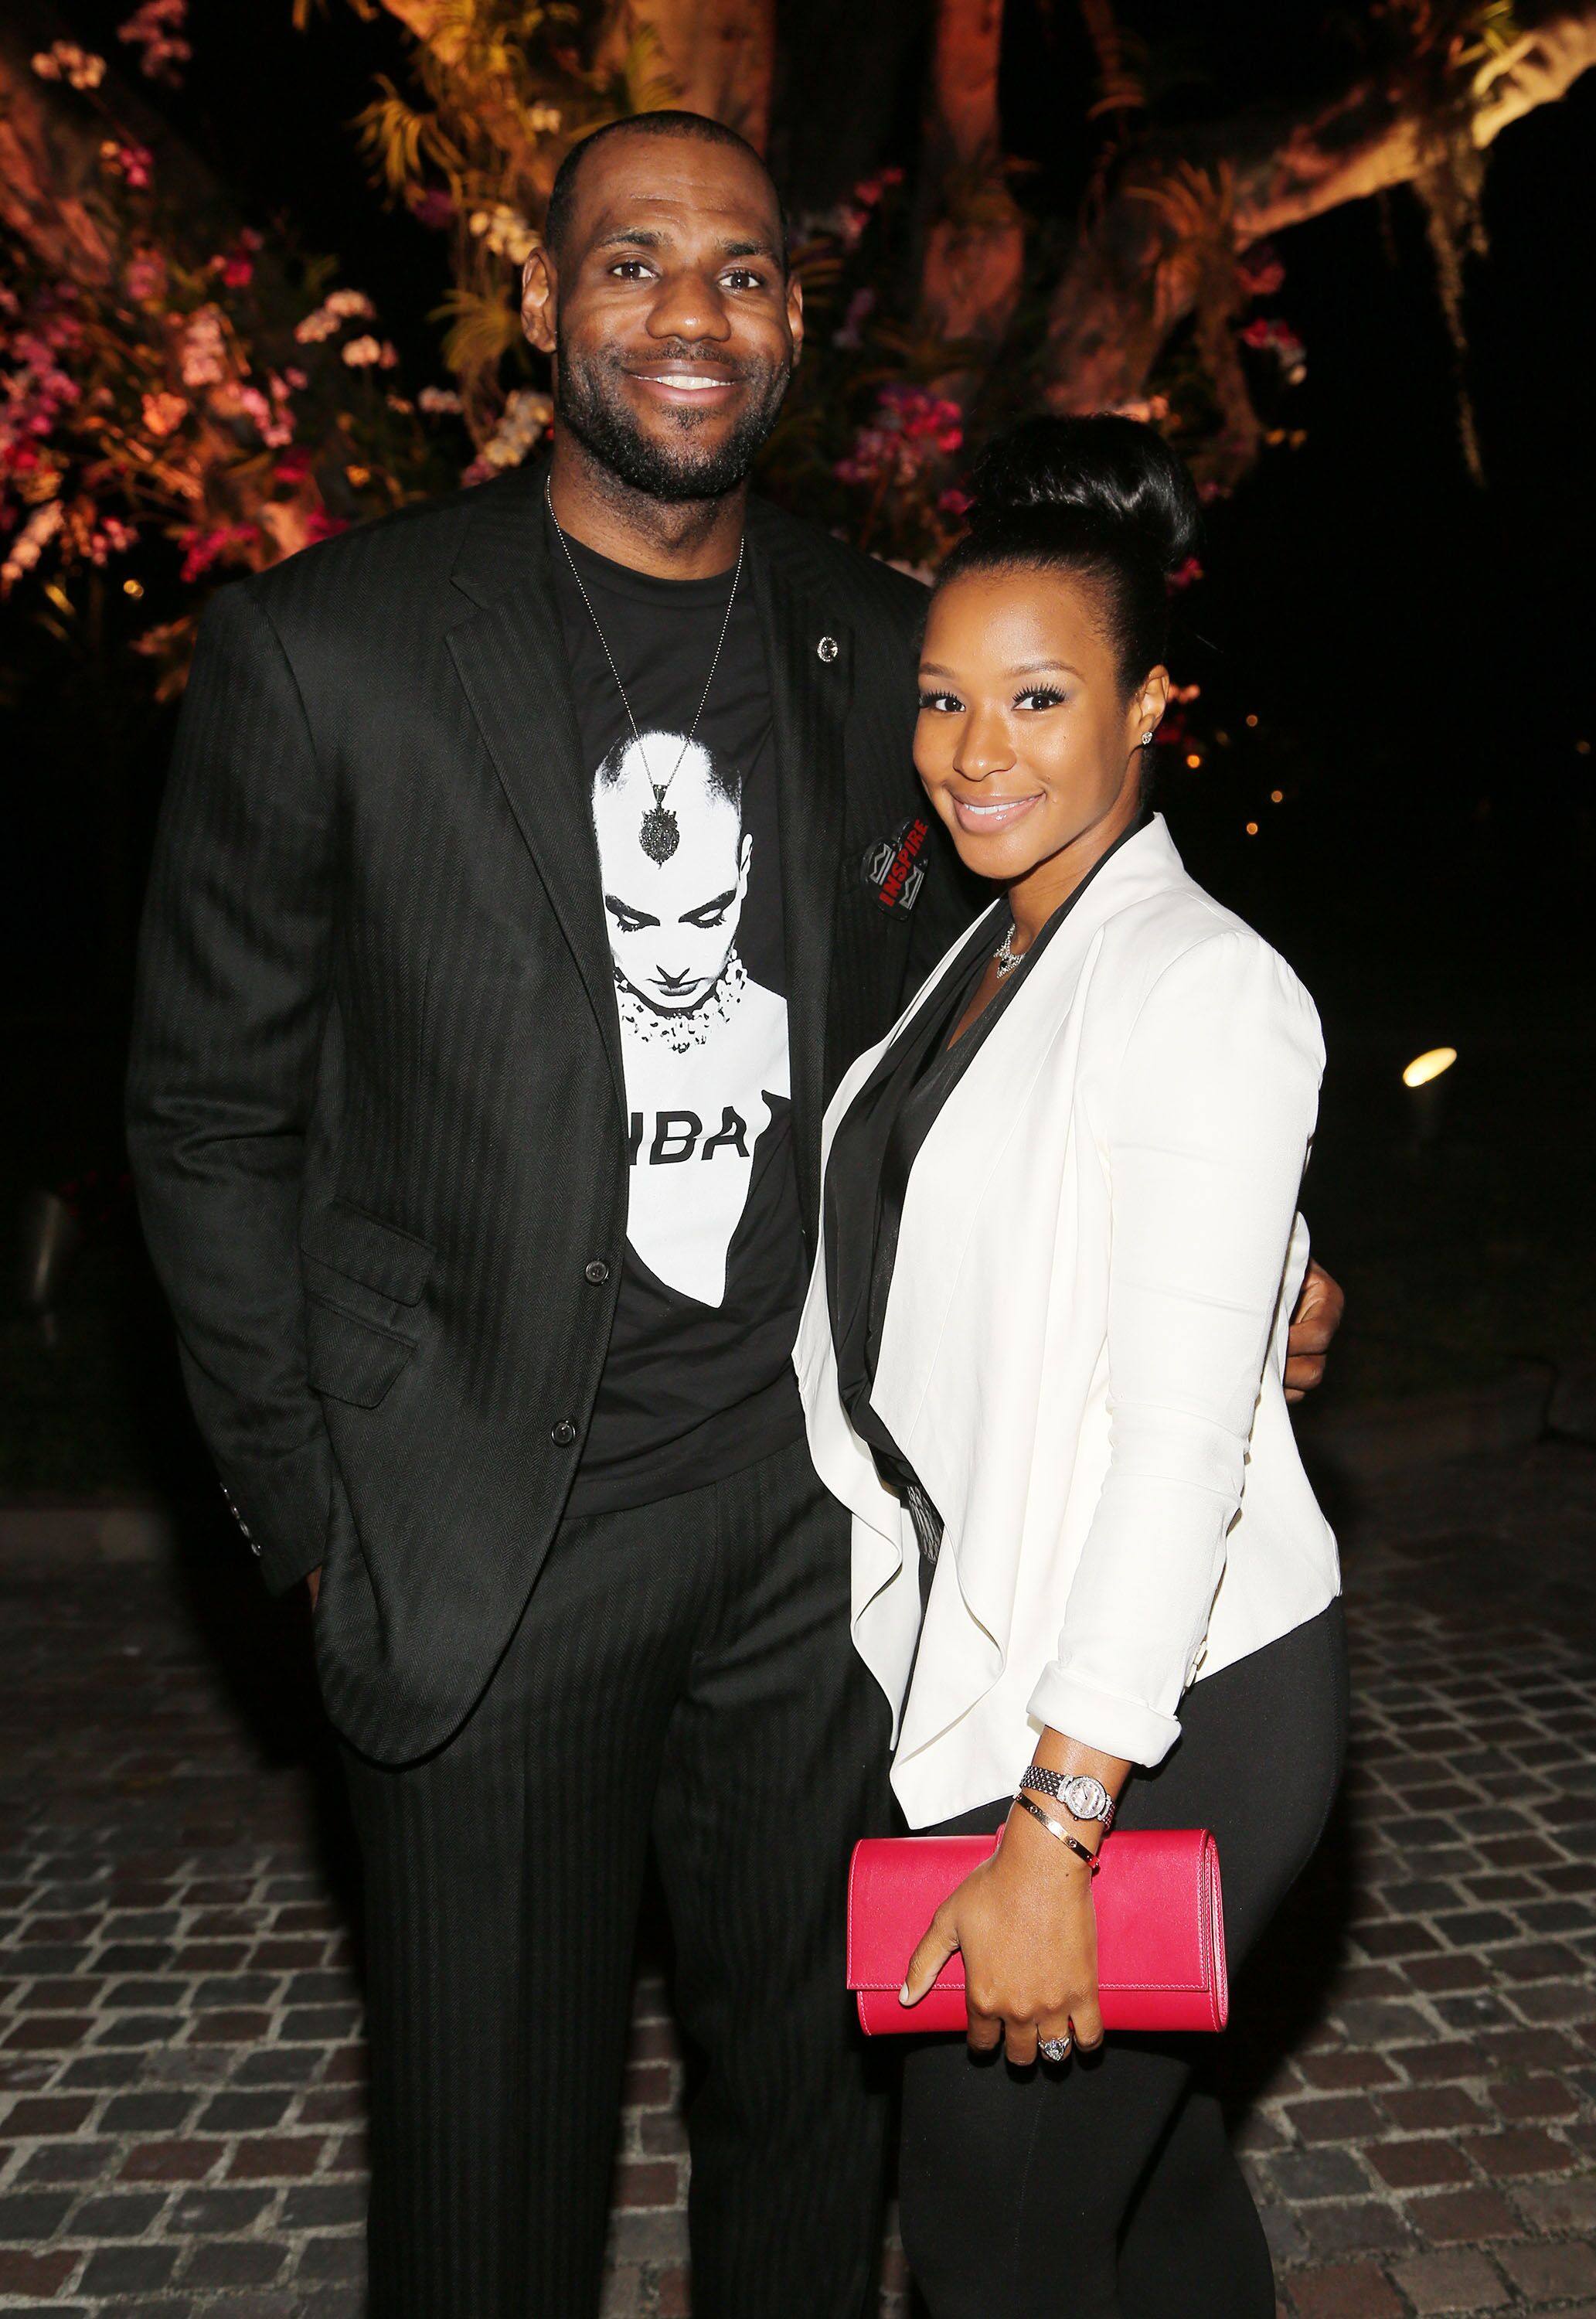 LeBron James and his wife Savannah Brinson James at the Miami HEAT's foundation night celebration in February 2013. | Photo: Getty Images